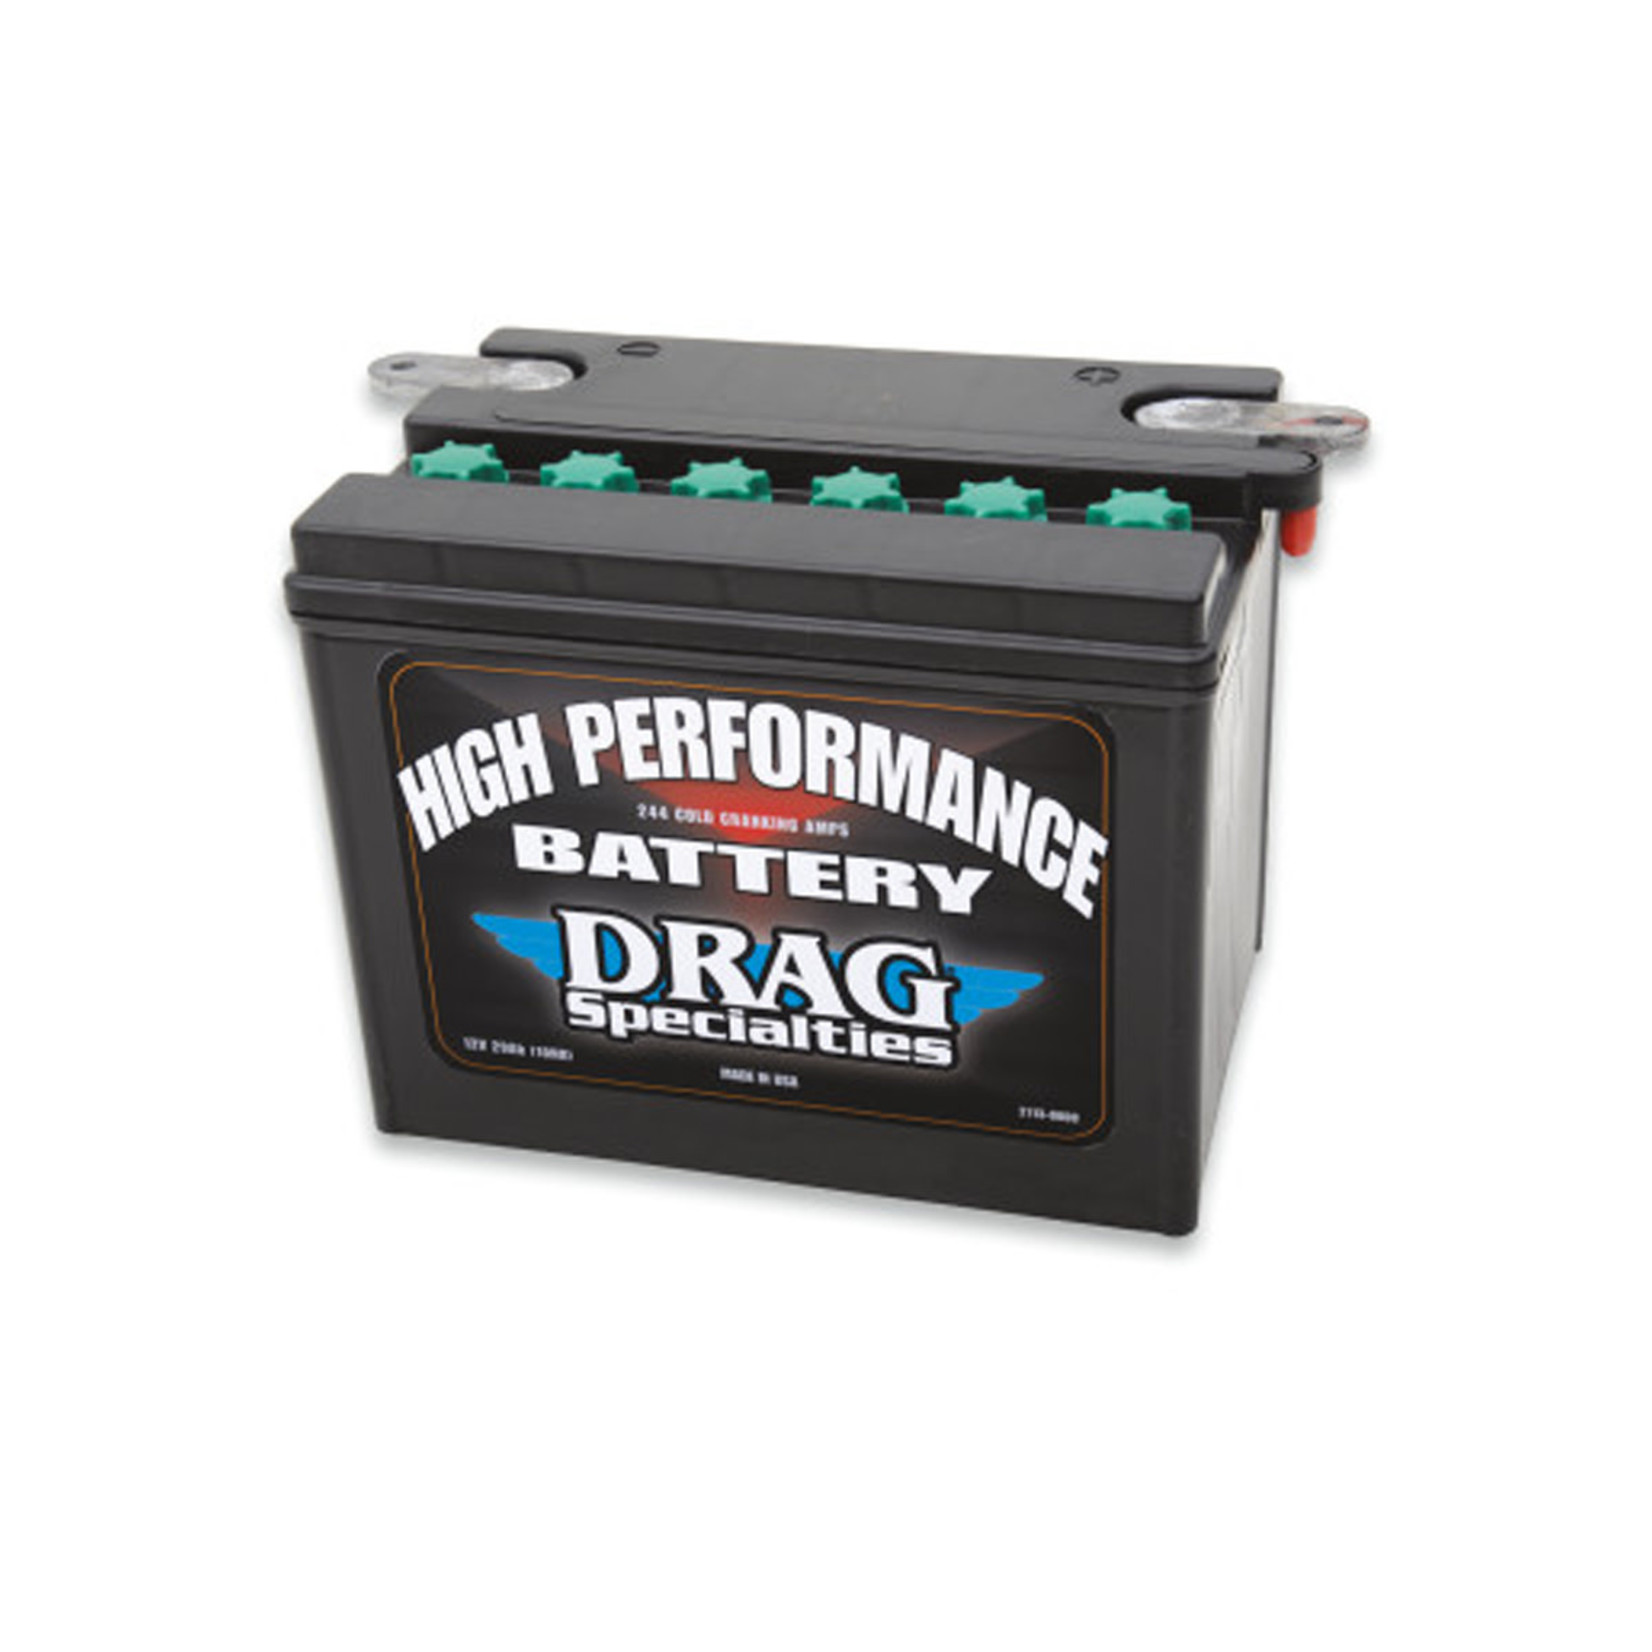 DRAG SPECIALITIES DRAG SPECIALTIES  HIGH PERFORMANCE BATTERY